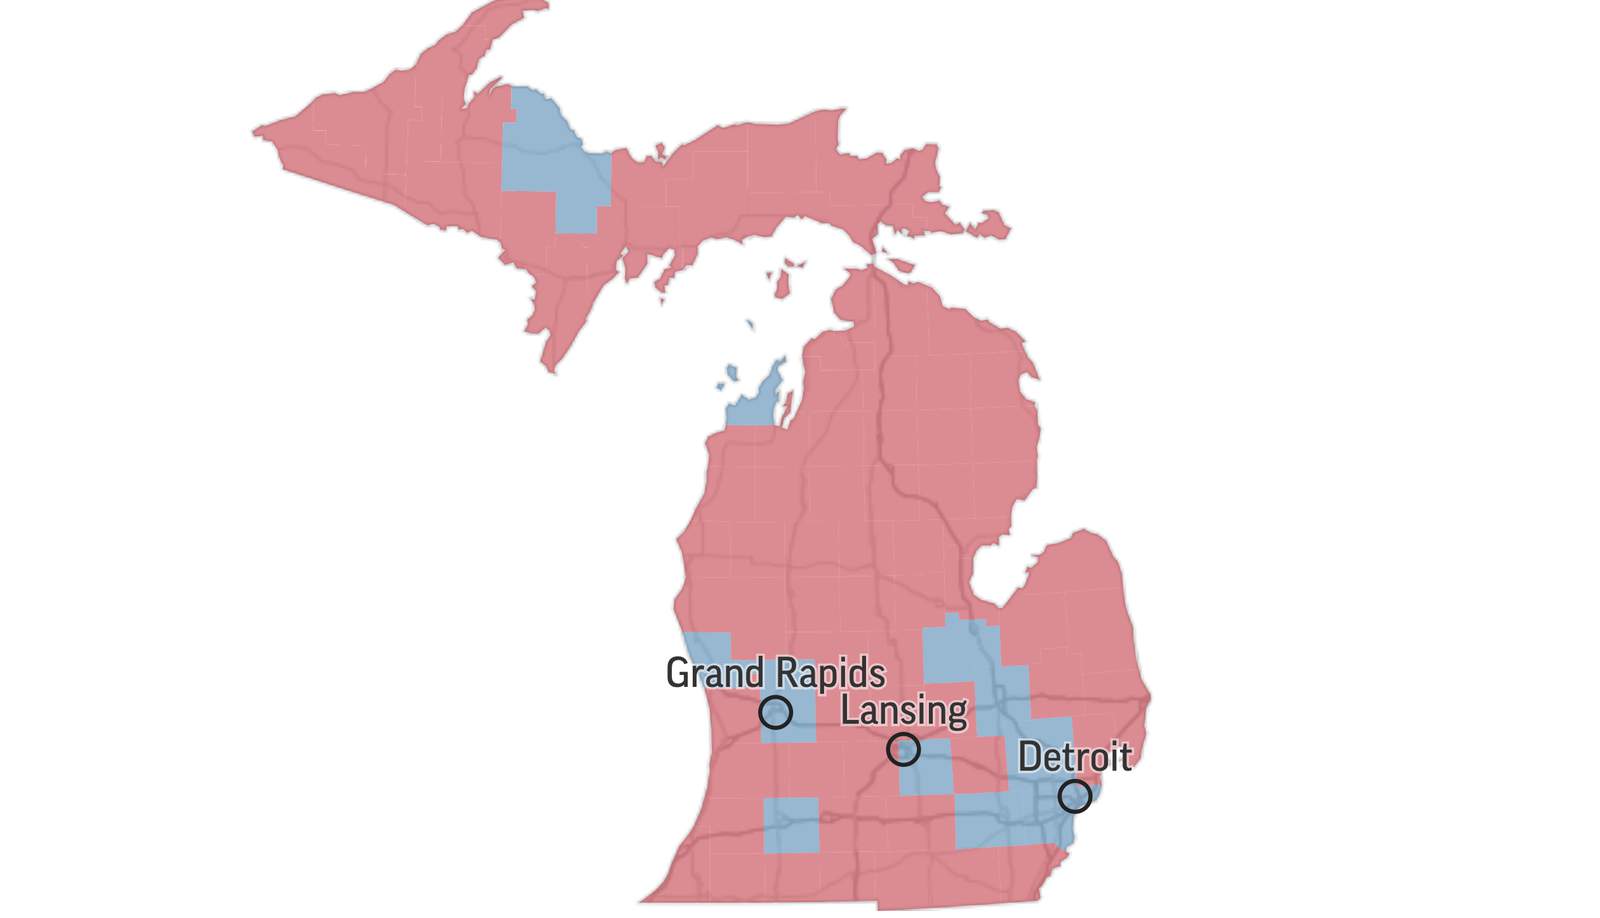 How Detroit suburbs voted in 2020 presidential election